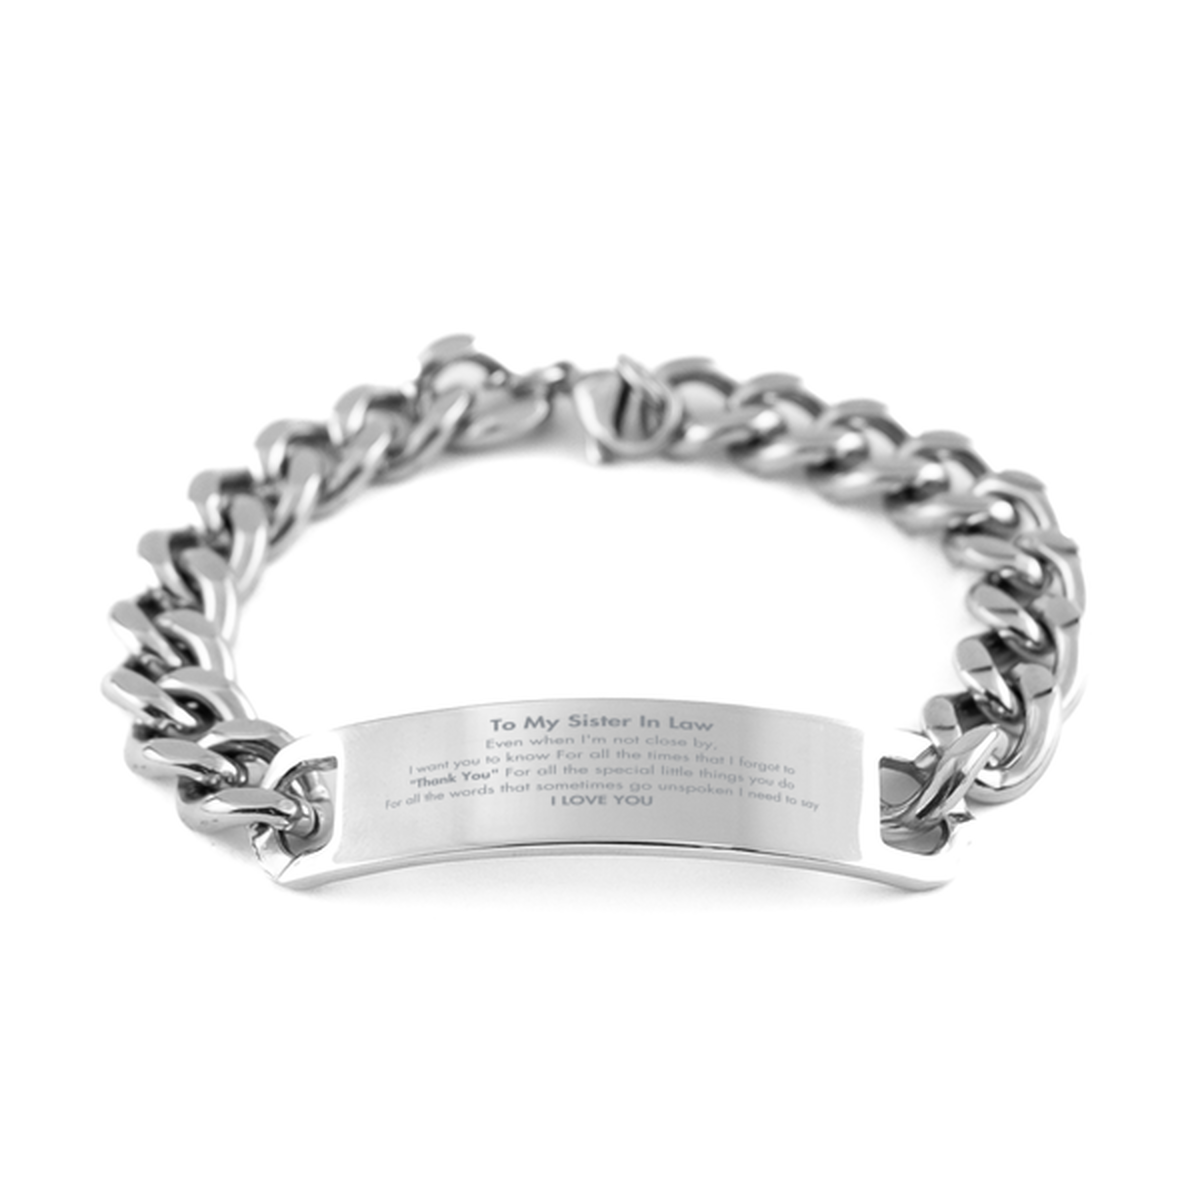 Thank You Gifts for Sister In Law, Keepsake Cuban Chain Stainless Steel Bracelet Gifts for Sister In Law Birthday Mother's day Father's Day Sister In Law For all the words That sometimes go unspoken I need to say I LOVE YOU